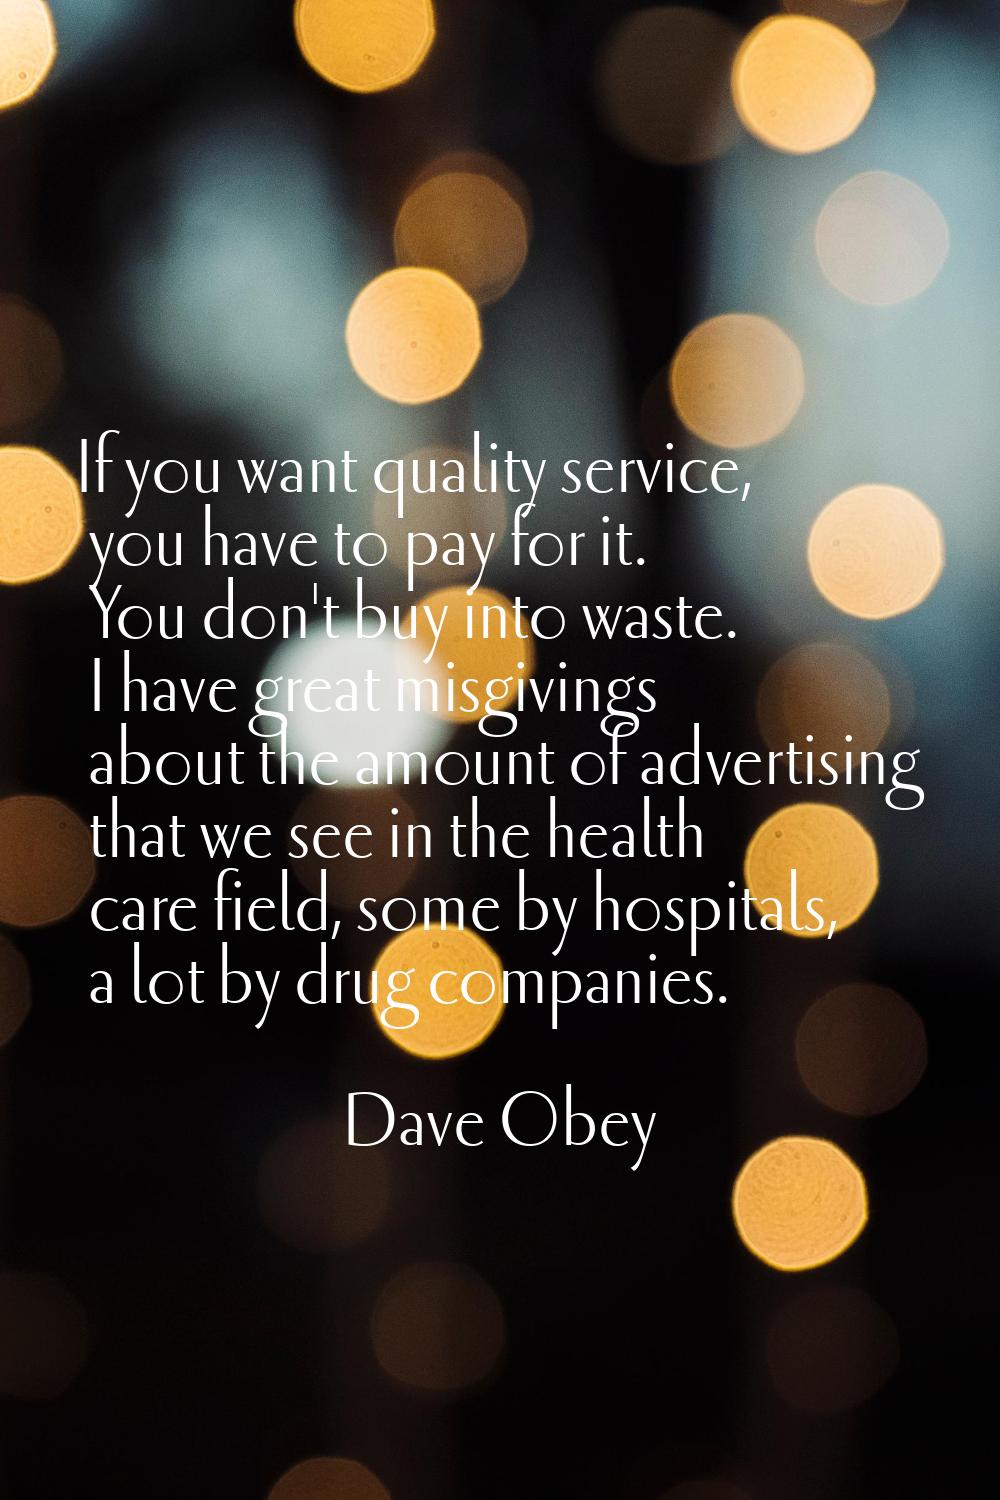 If you want quality service, you have to pay for it. You don't buy into waste. I have great misgivi